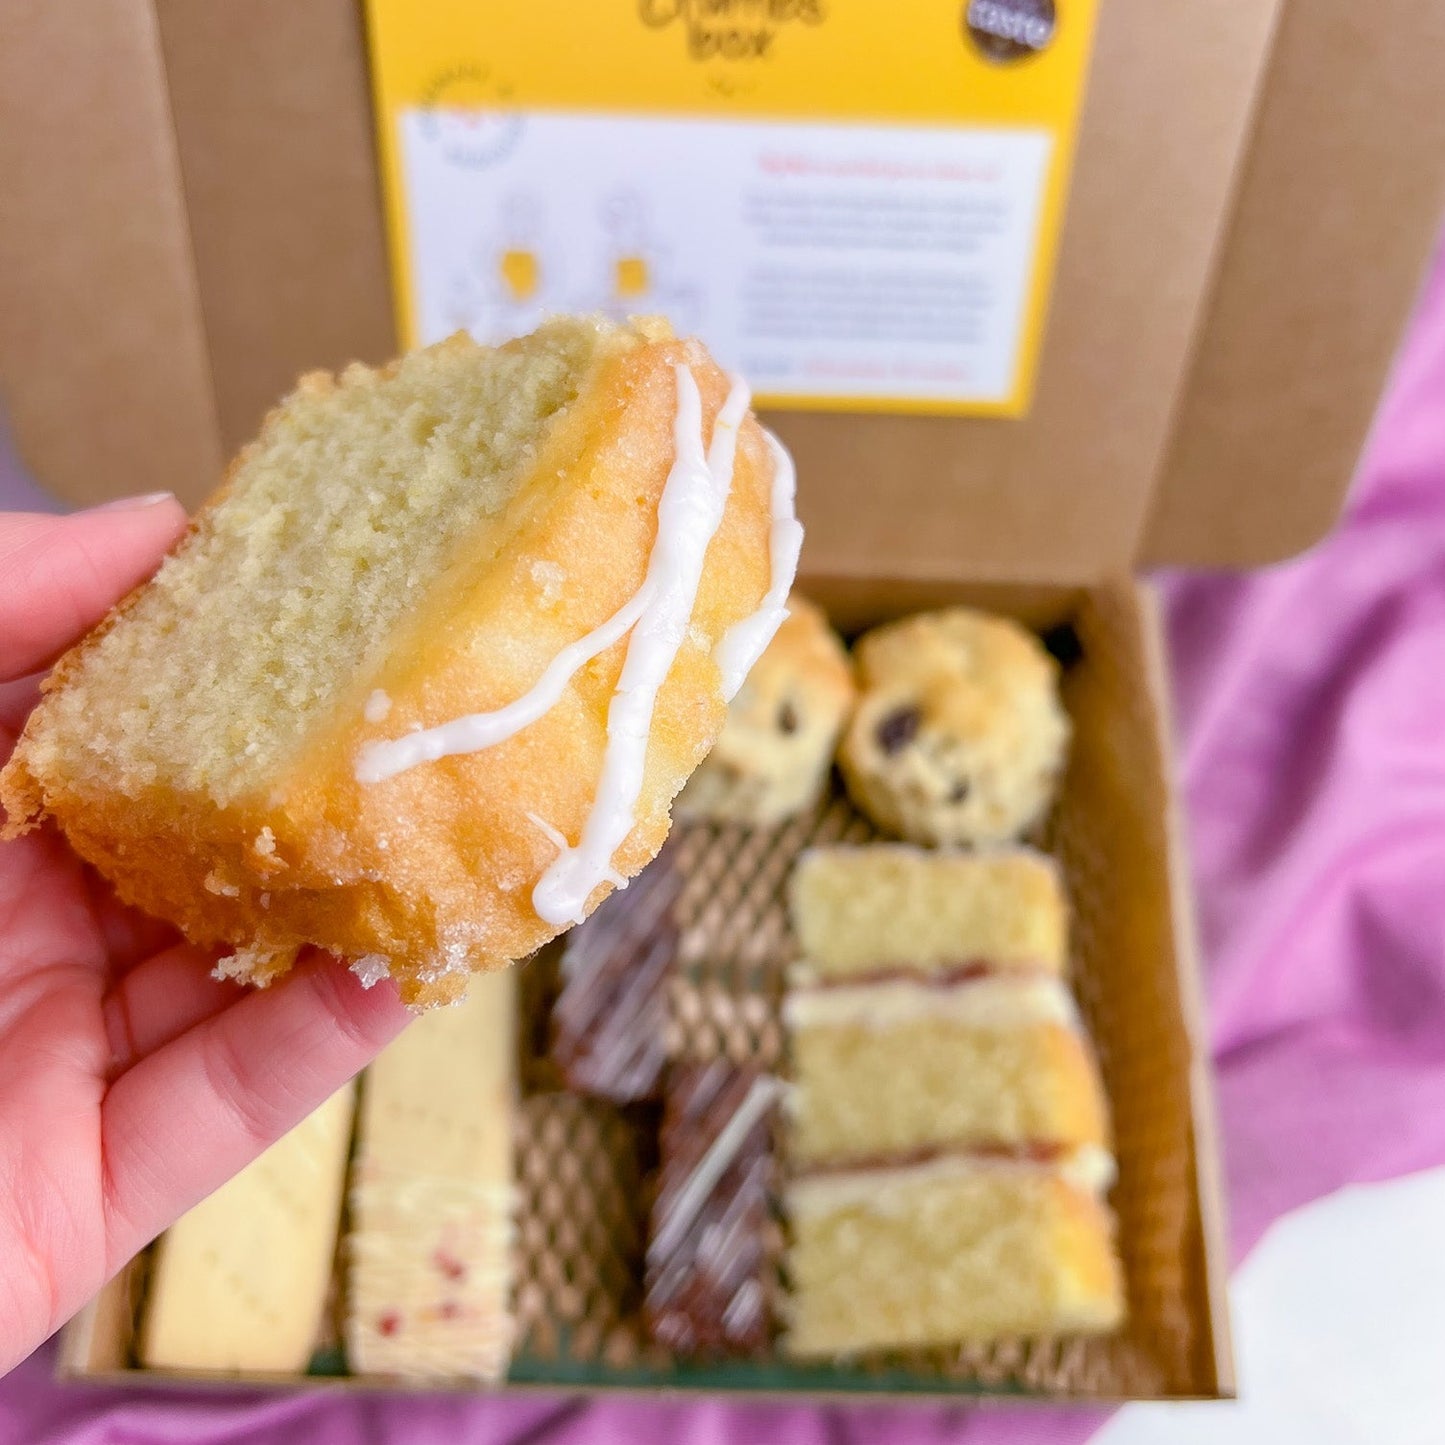 lemon drizzle slice presented with afternoon tea gift box